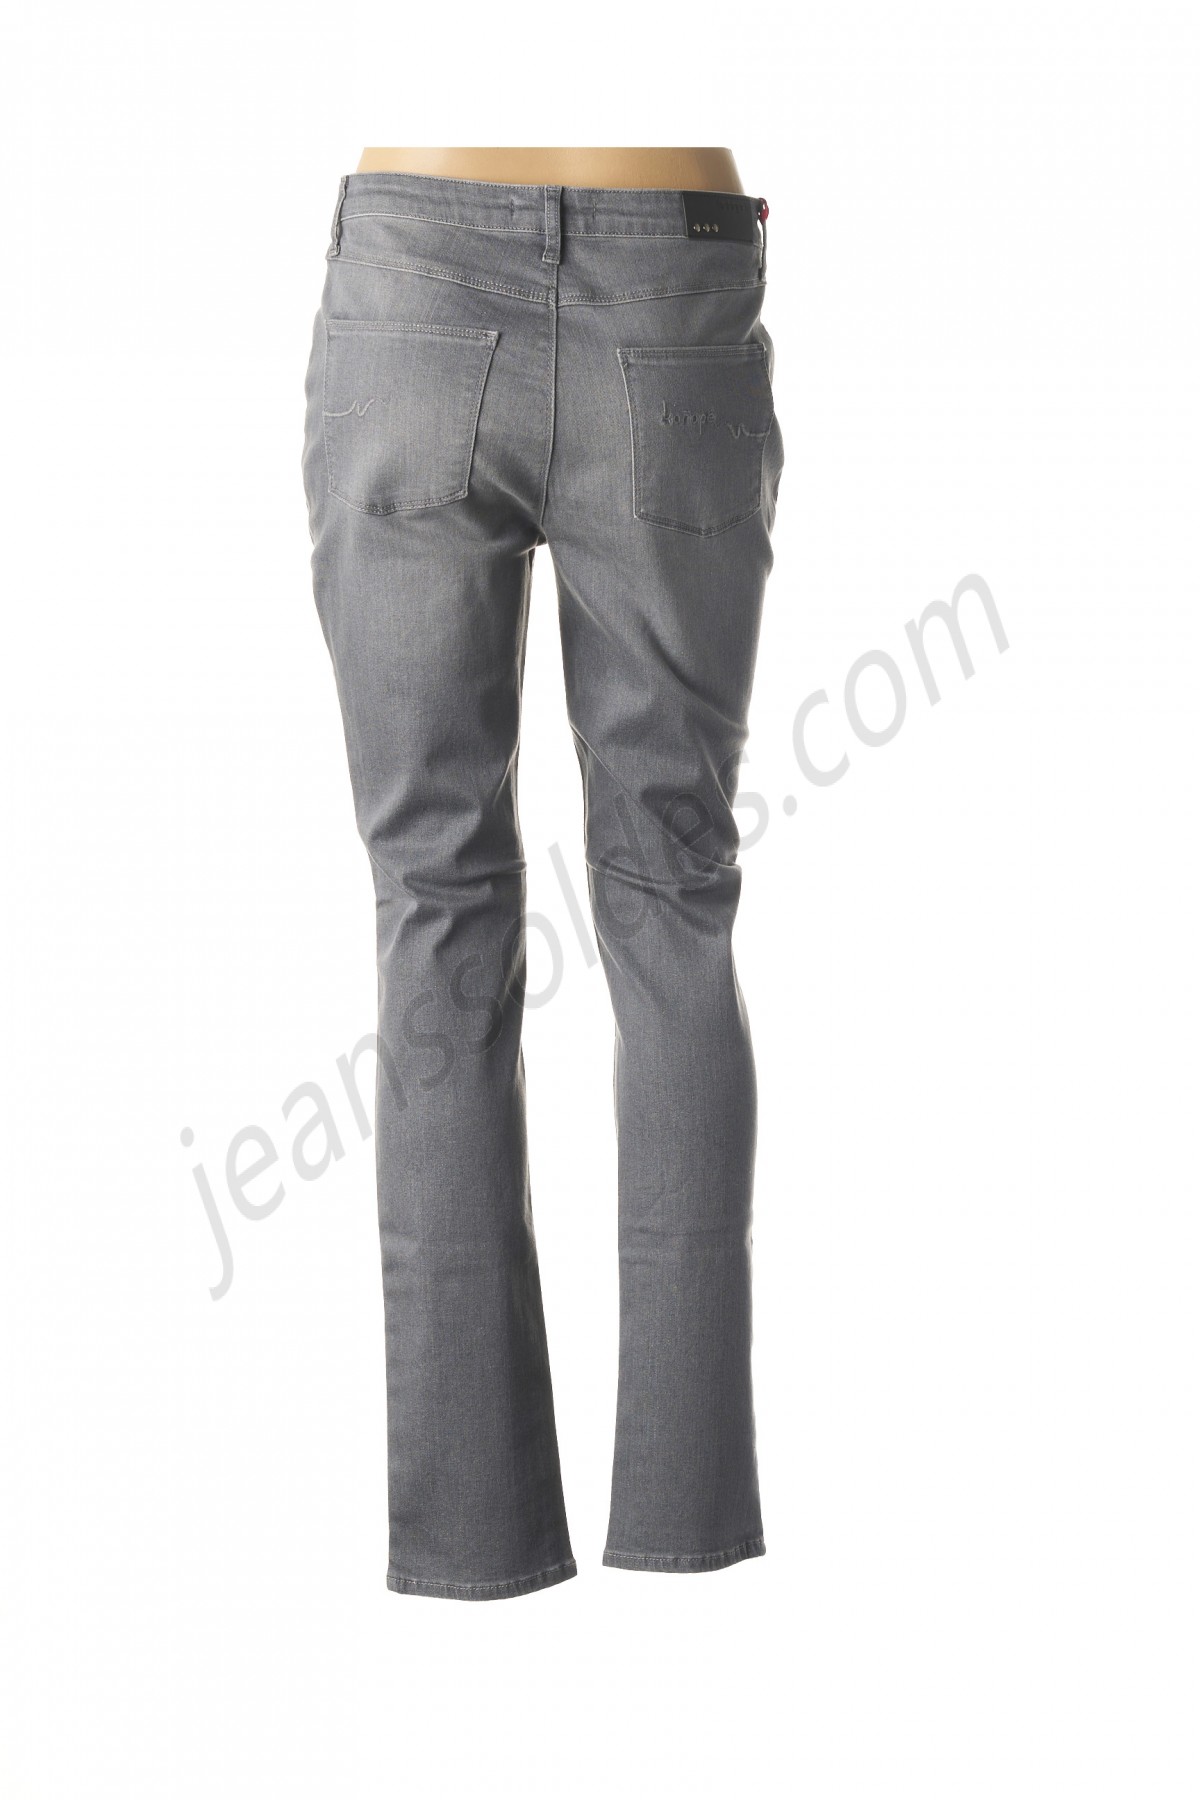 kanope-Jeans coupe slim prix d’amis - -1